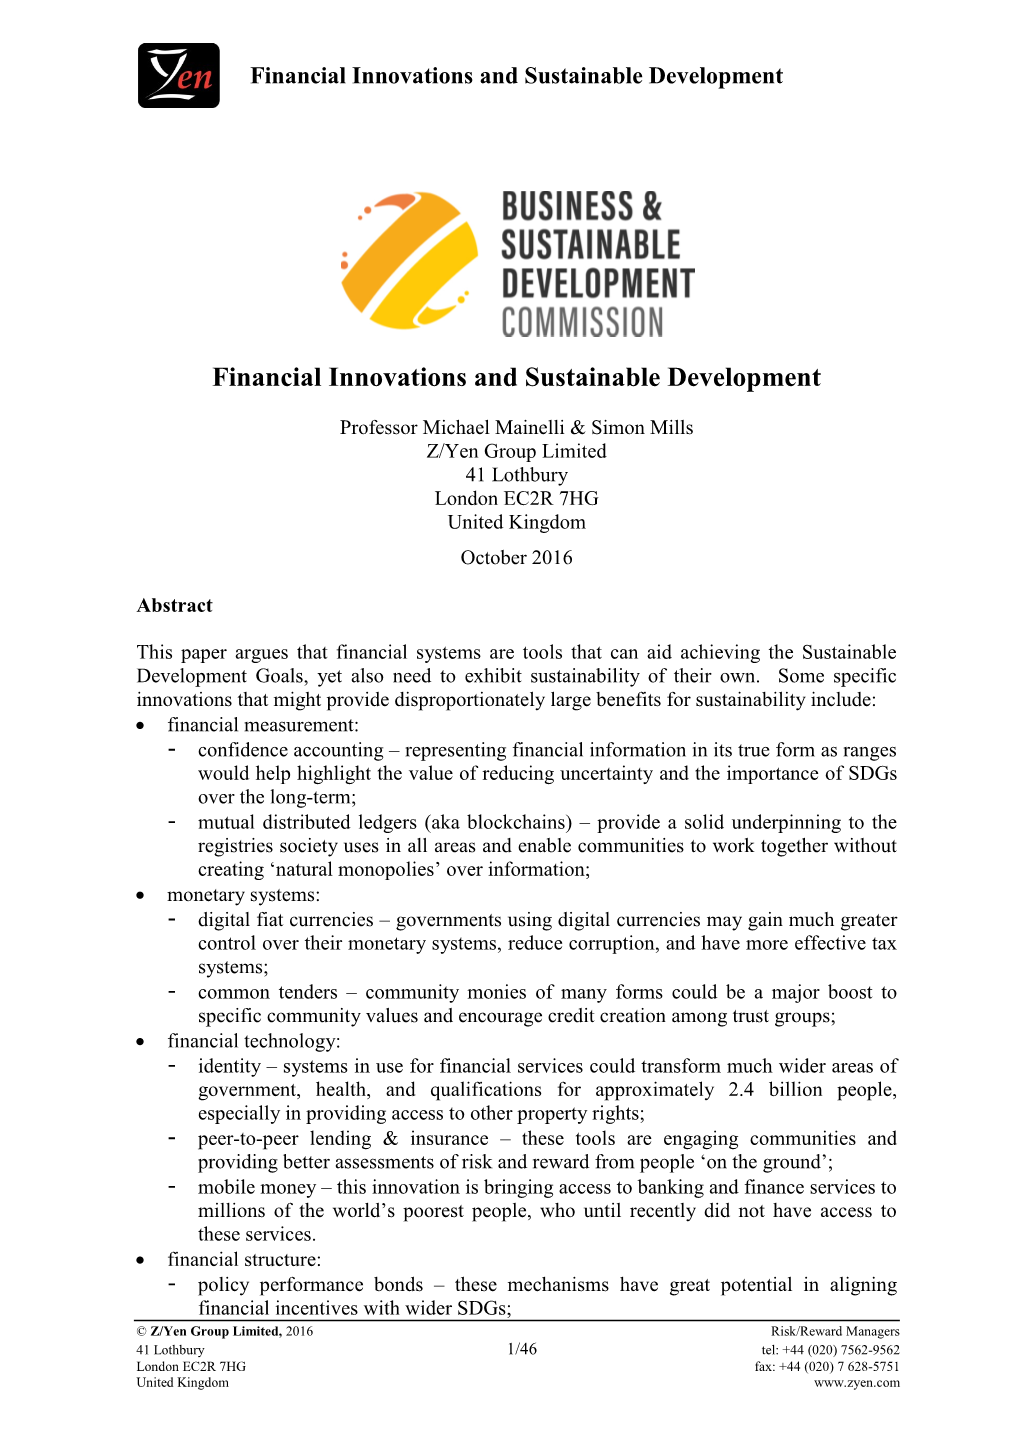 Financial Innovations and Sustainable Development